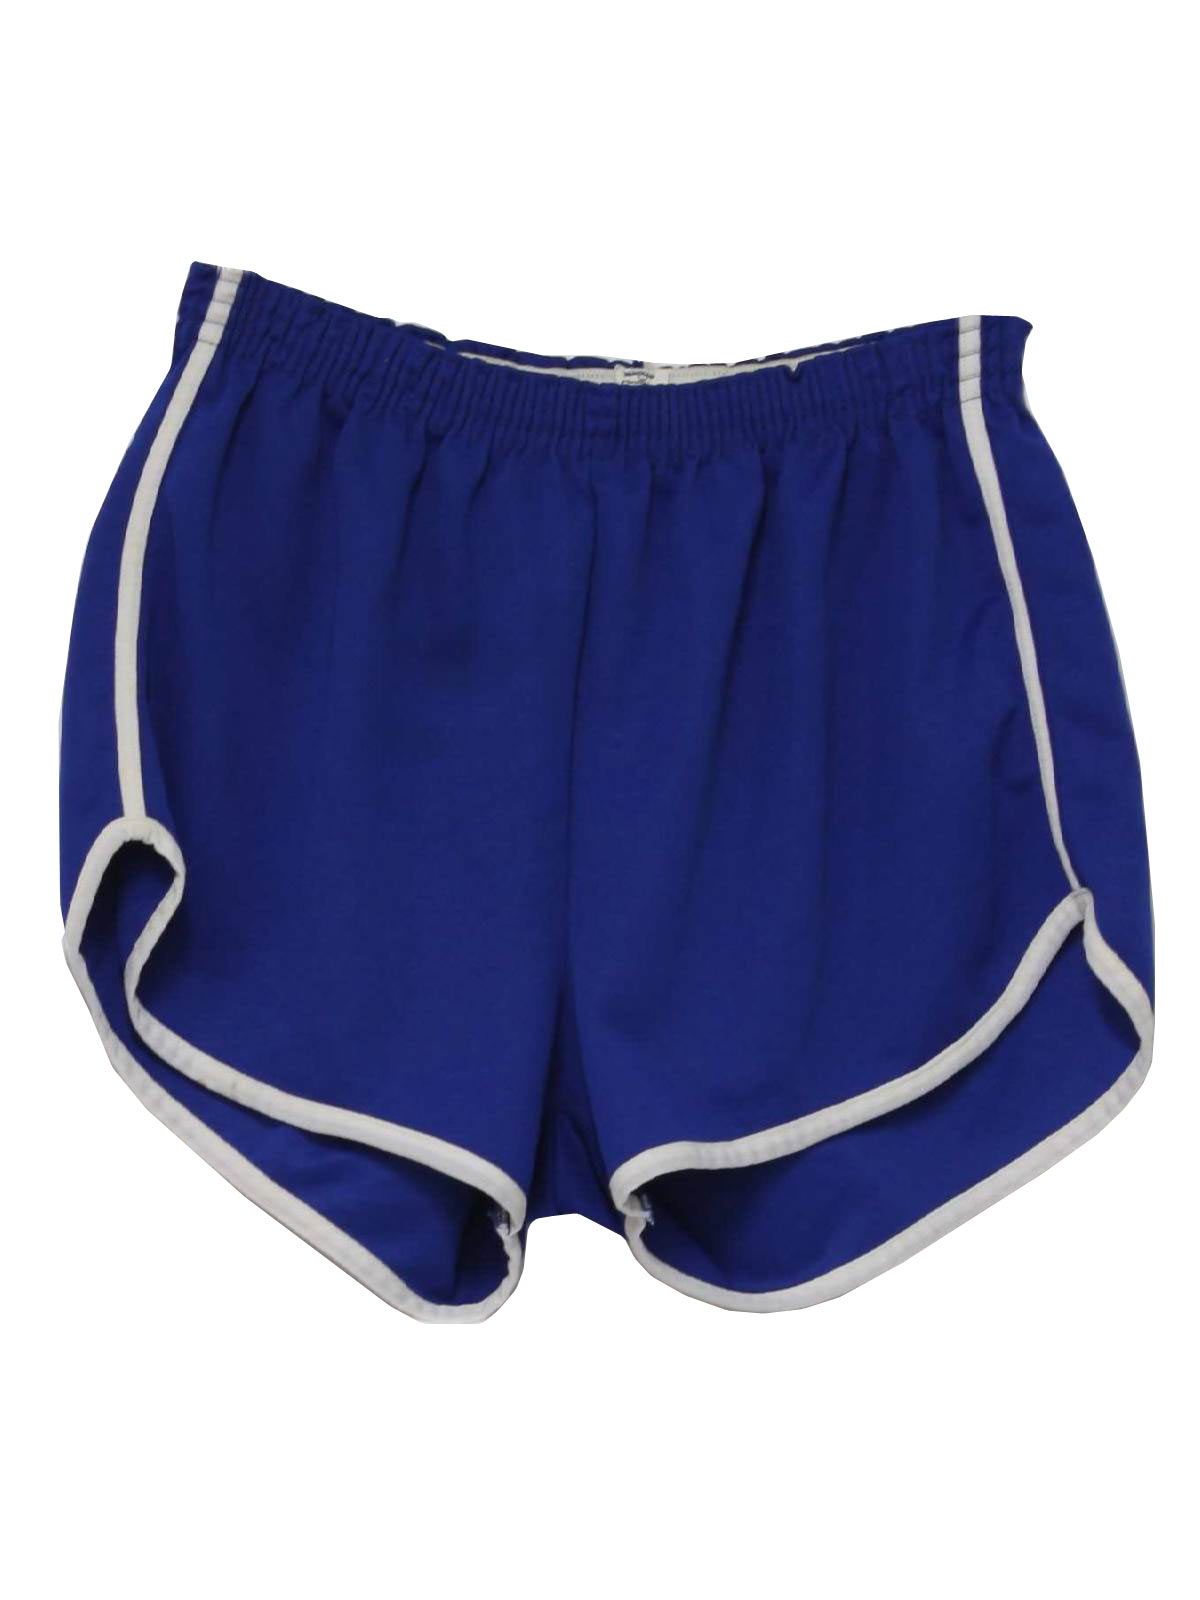 Kmart 70's Vintage Shorts: 70s -Kmart- Mens blue background polyester  blend, elastic waist gym shorts with white seam stripe design. Perfect for  wear with tube socks or over your favorite pair of